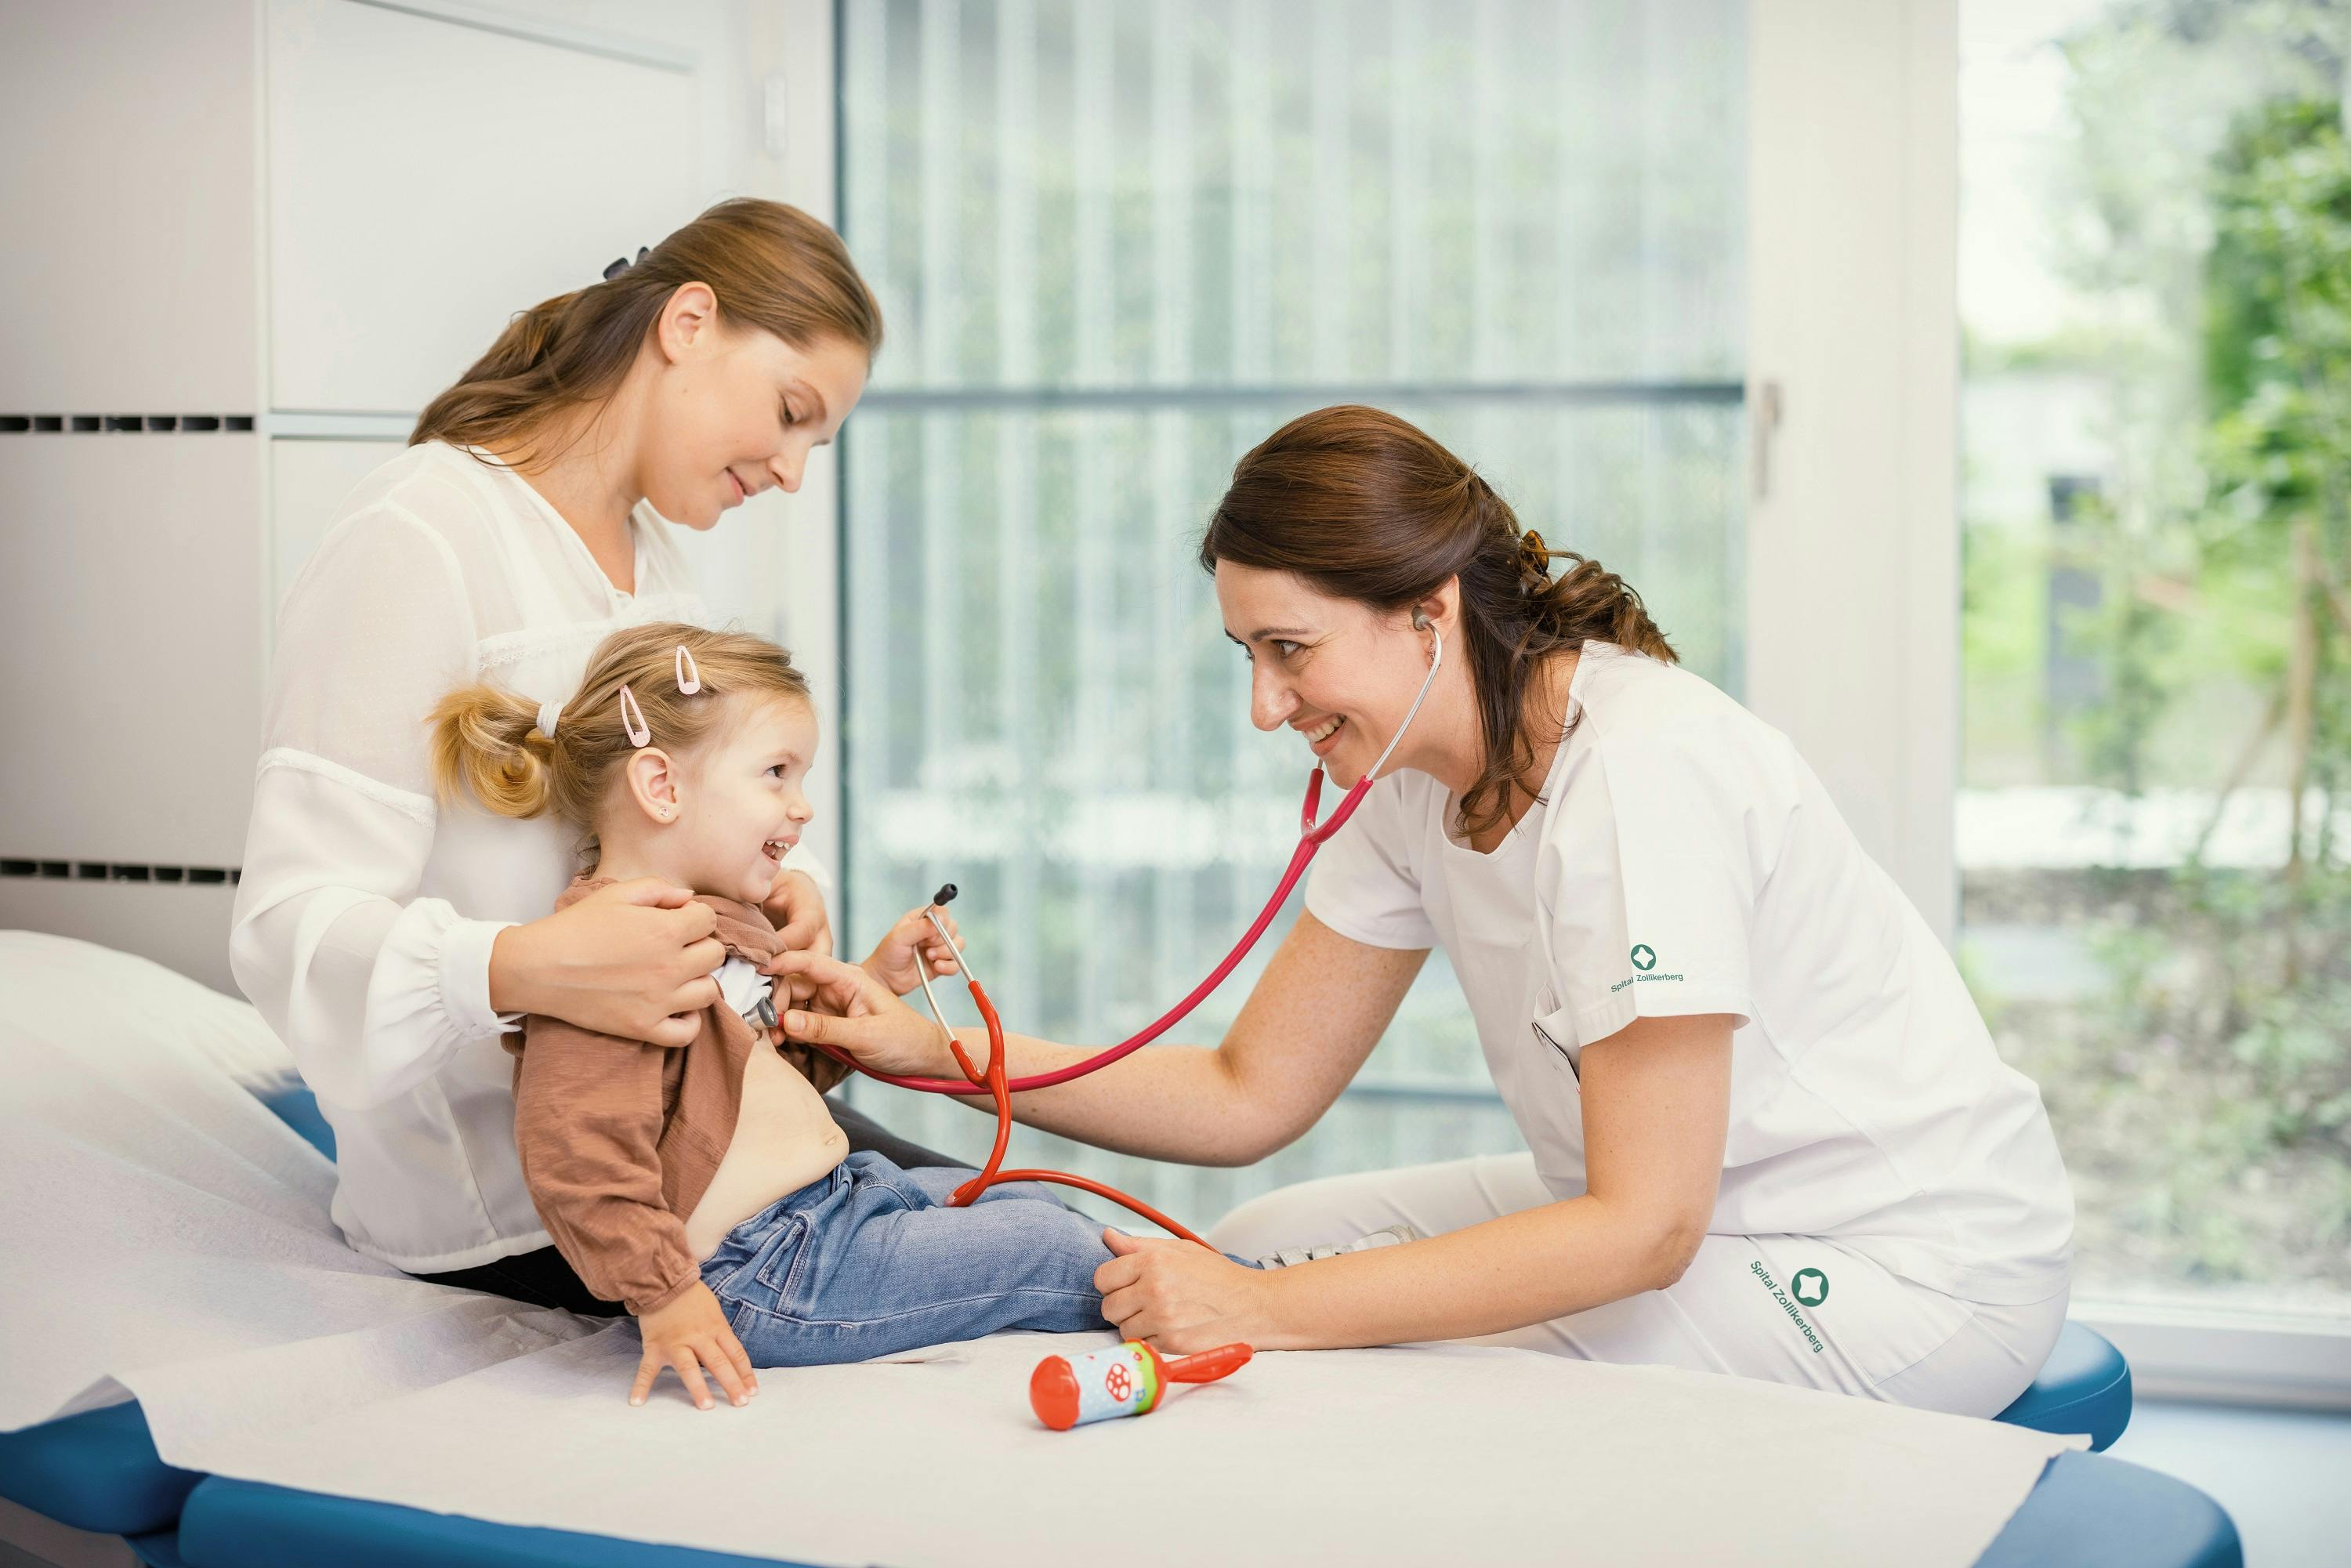 Paediatrician examines smiling child with stethoscope, mother assists.